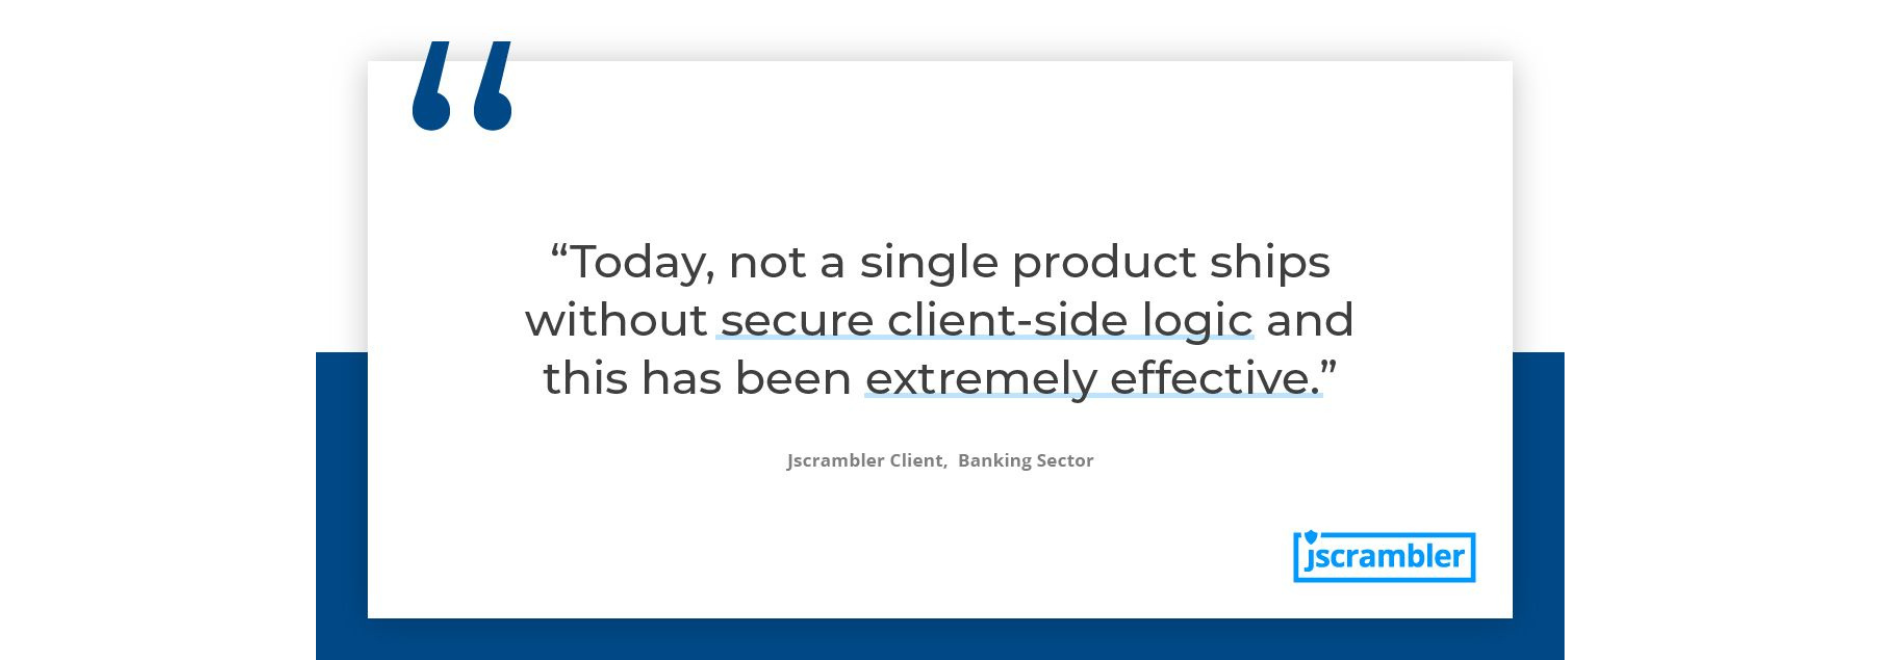 banking-sector-secure-client-side-logic-testimonial